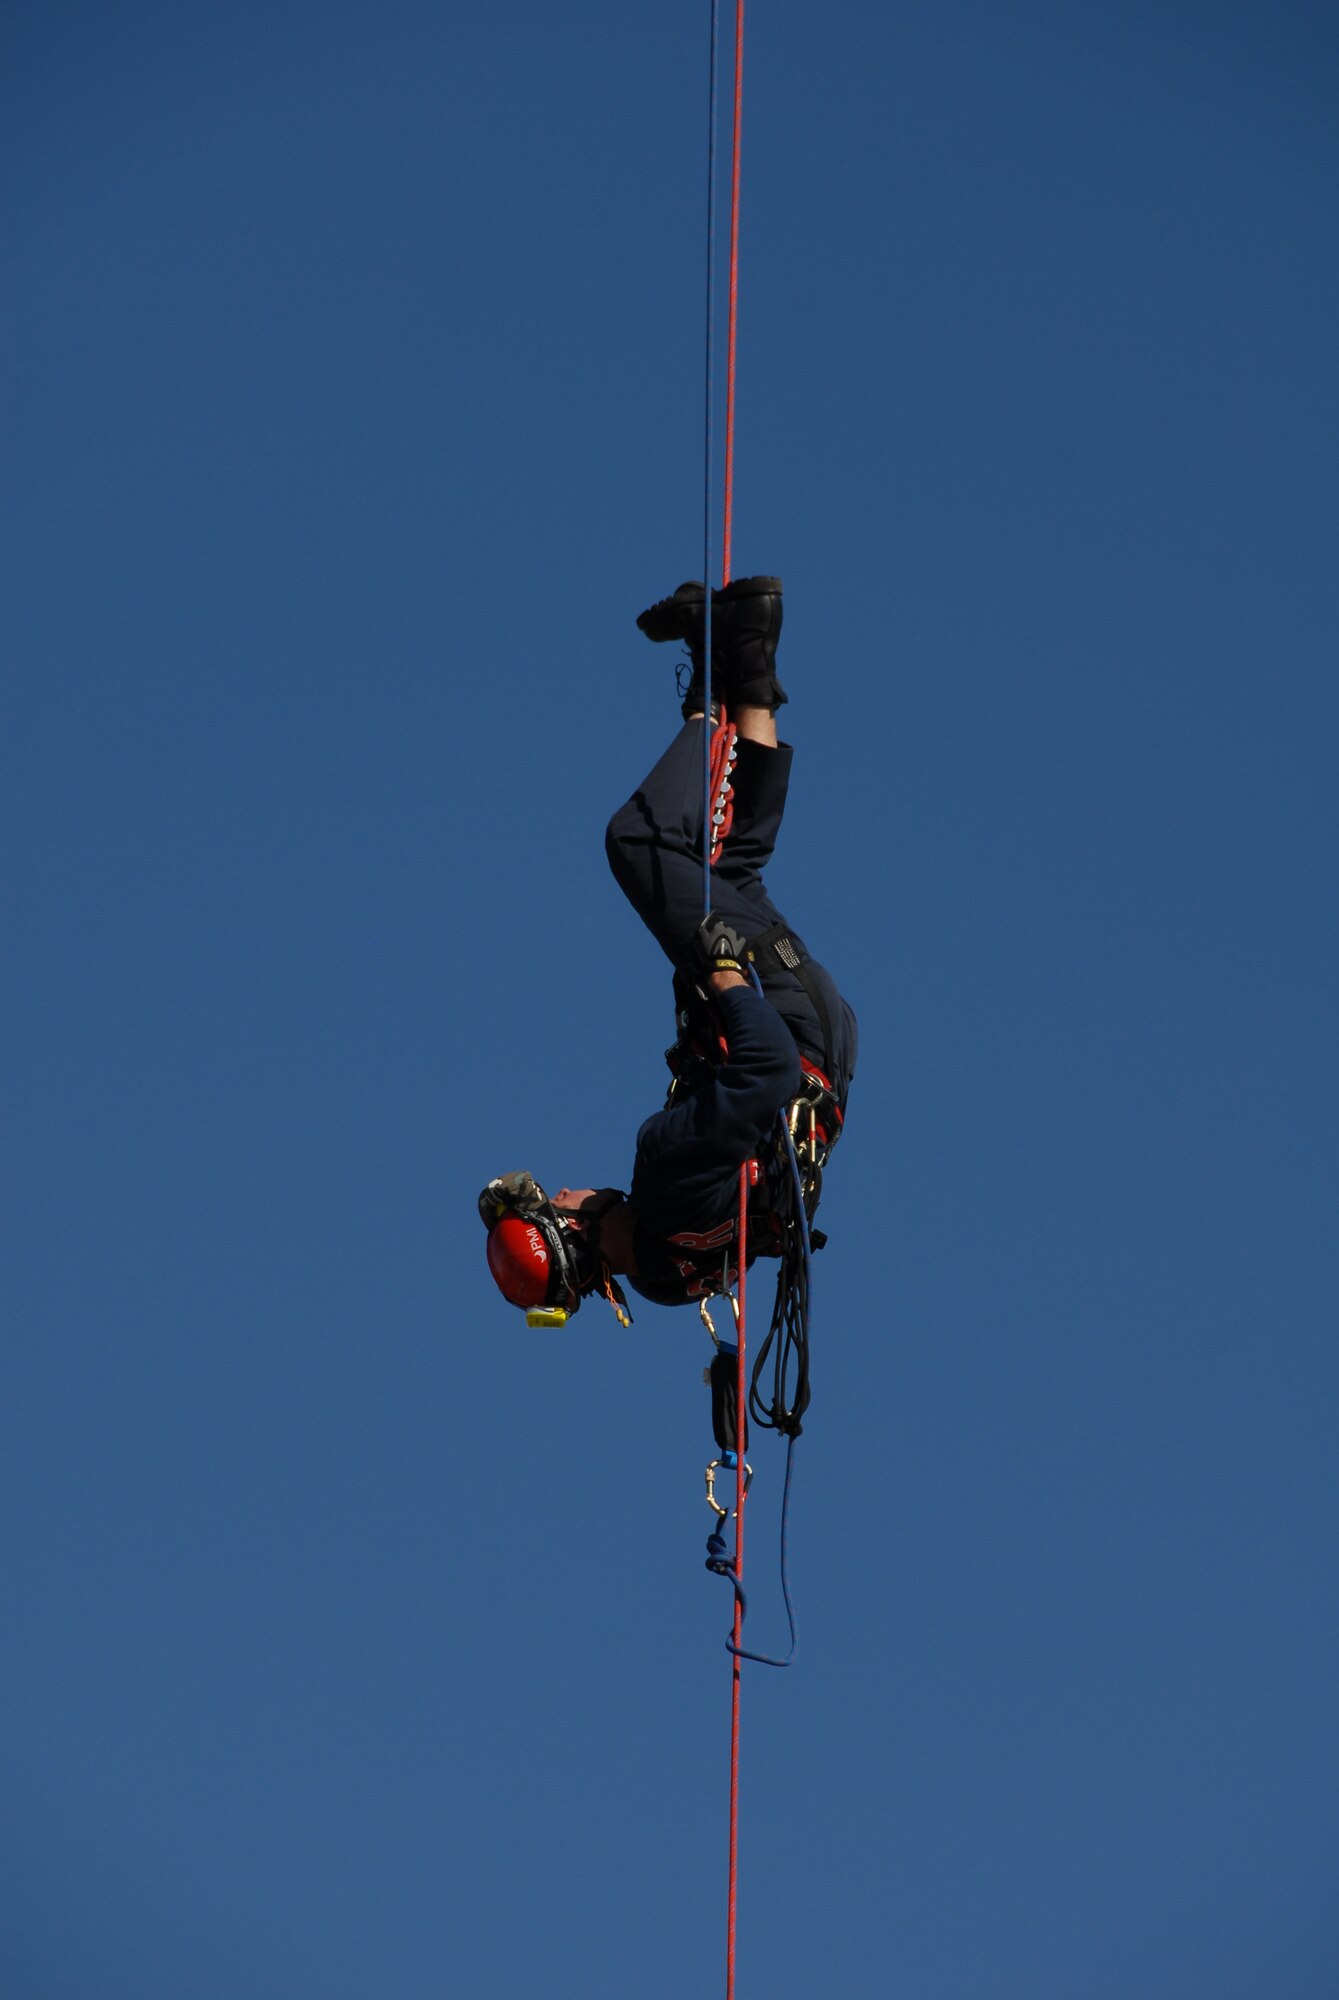 Senior Master Sgt. David Maupin, 231st Civil Engineer Flight, dangles upside down during a rappel demonstration done for servicemembers at Lambert International Airport Oct. 18 in honor of Fire Safety Month to show the members some of the local firefighters training. (Photo by Master Sgt. Mary-Dale Amison)